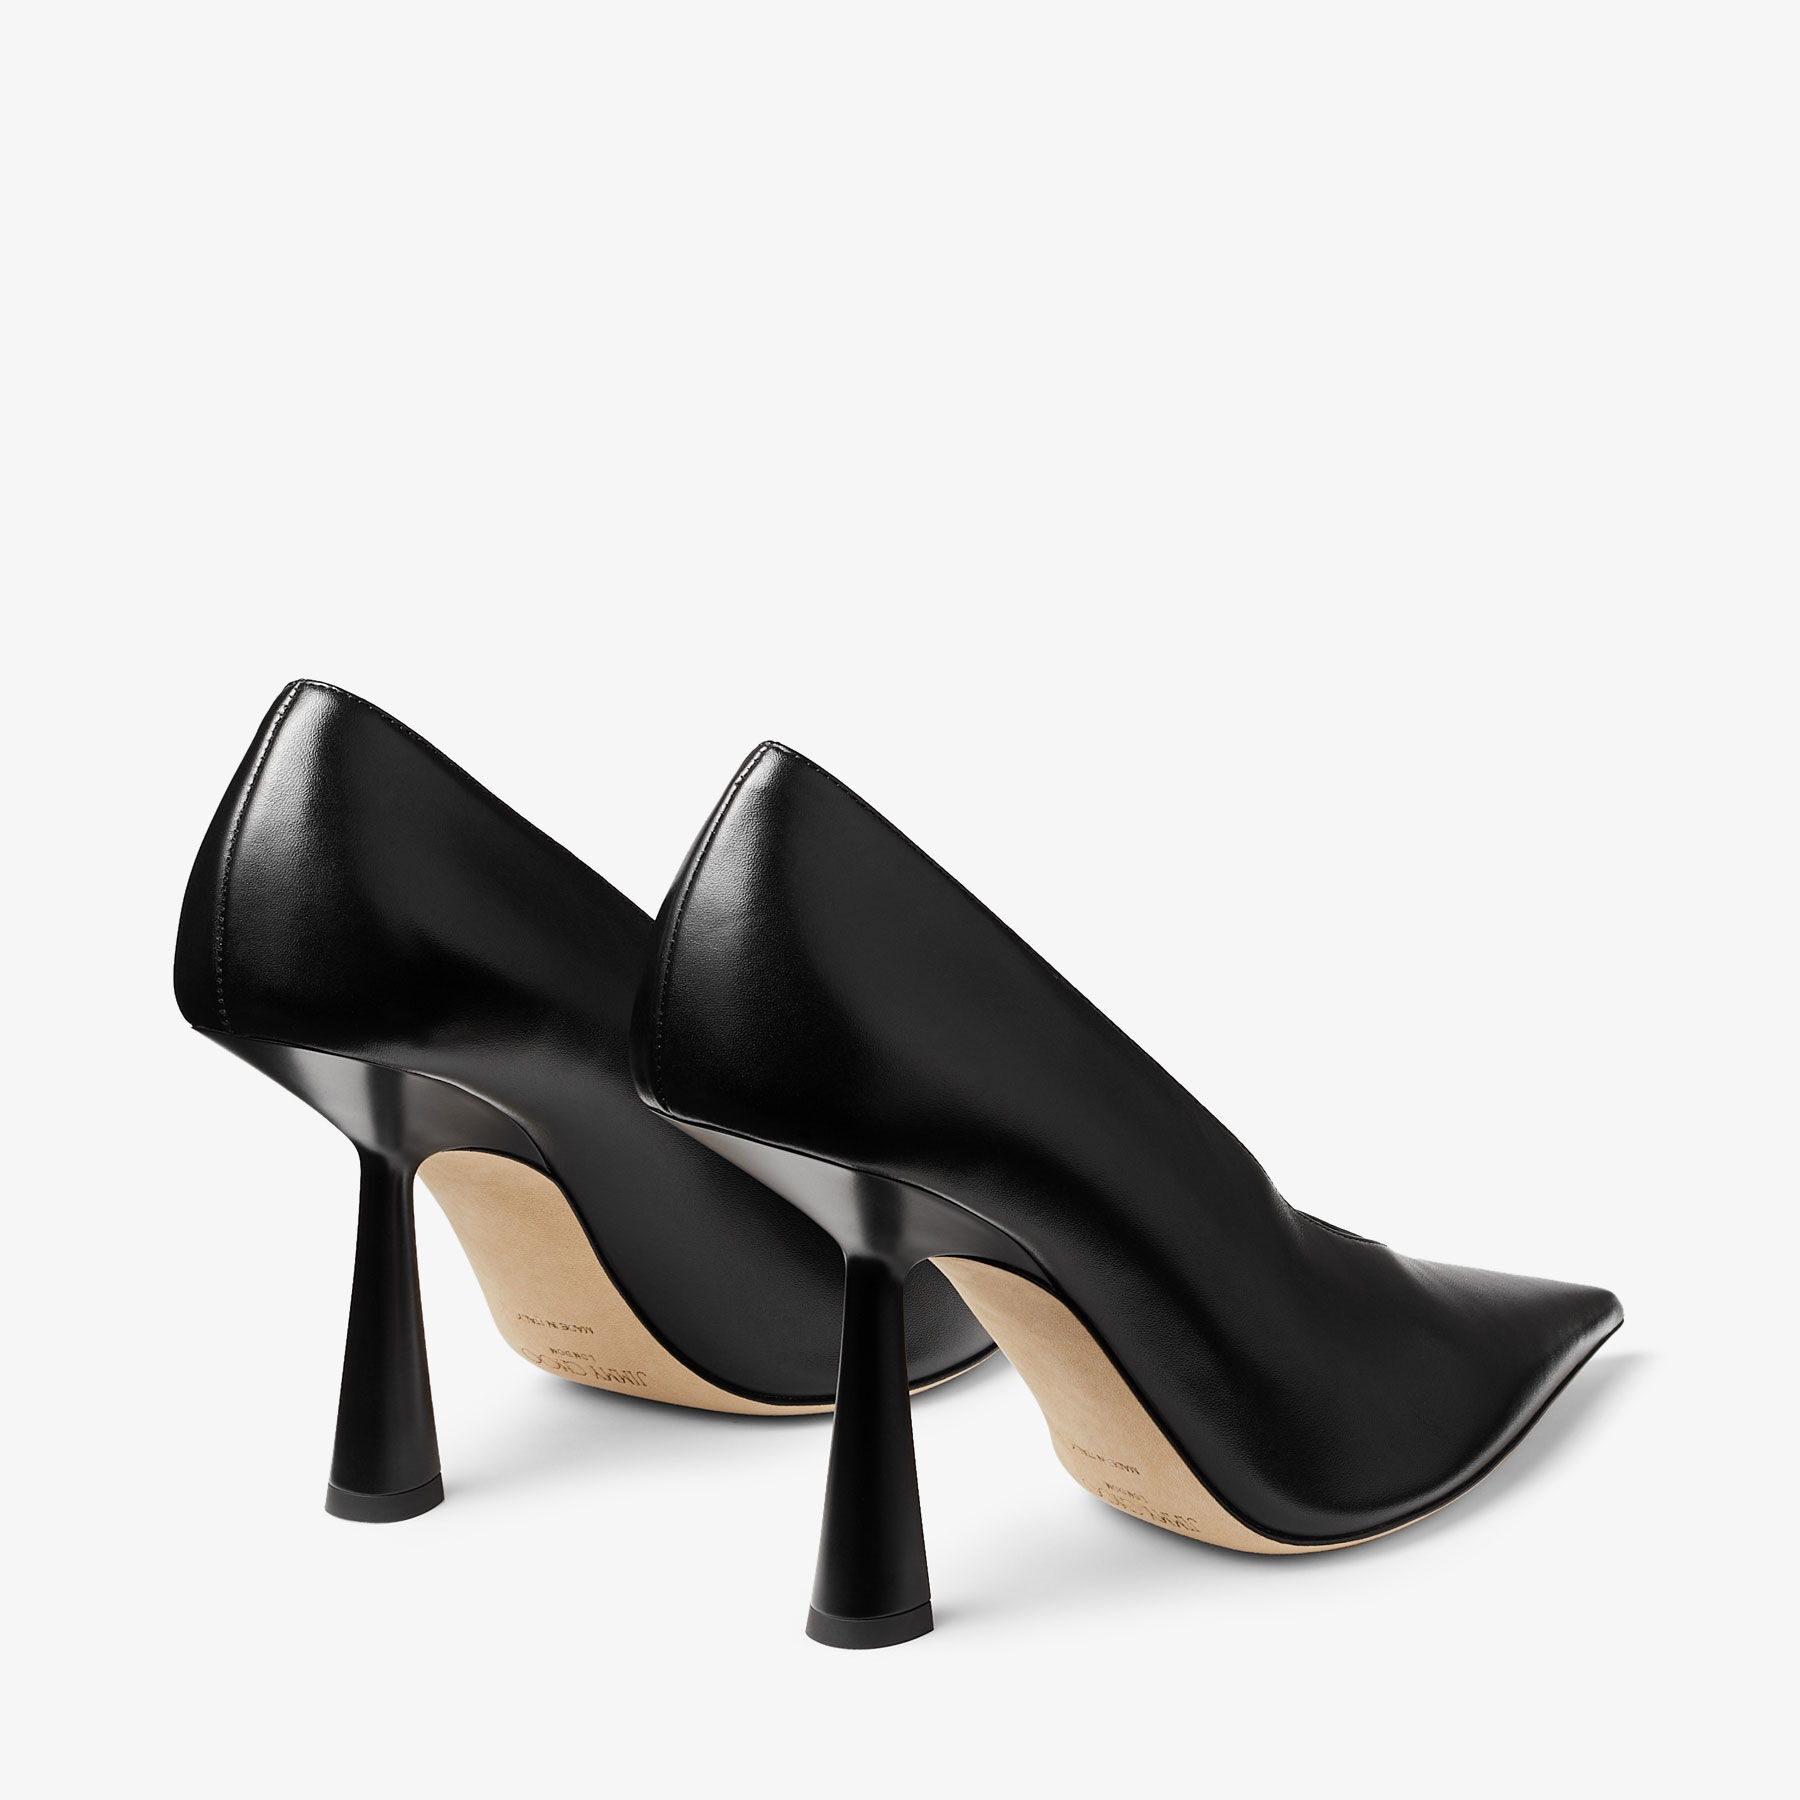 Maryanne 100
Black Calf Leather Pointed-Toe Pumps - 5